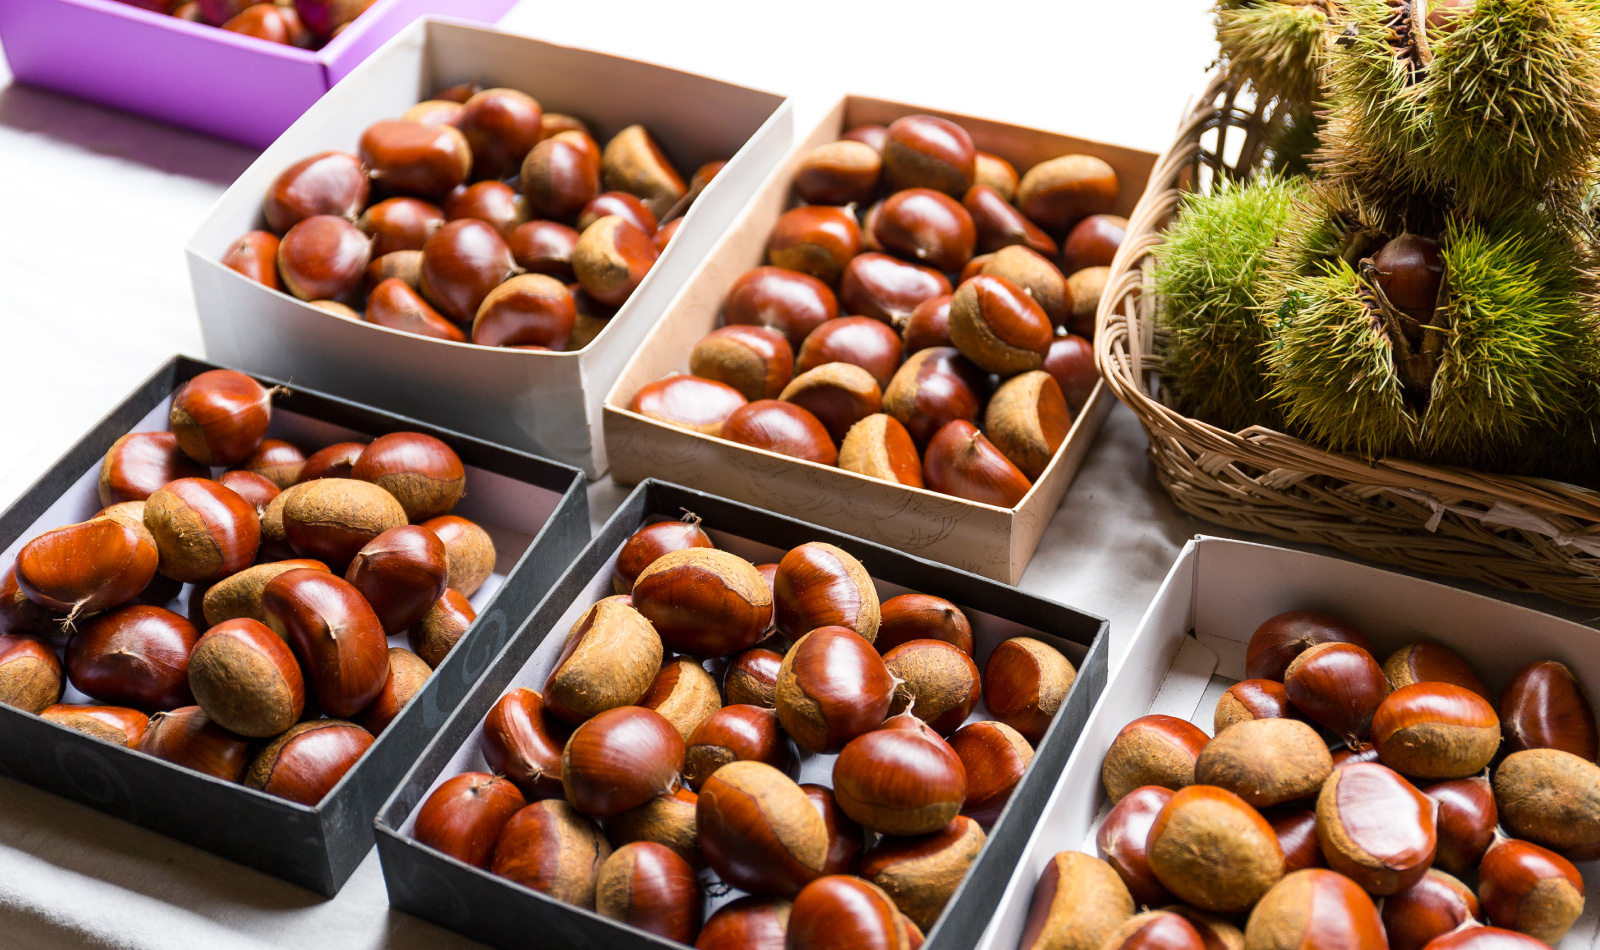 stand-castagne